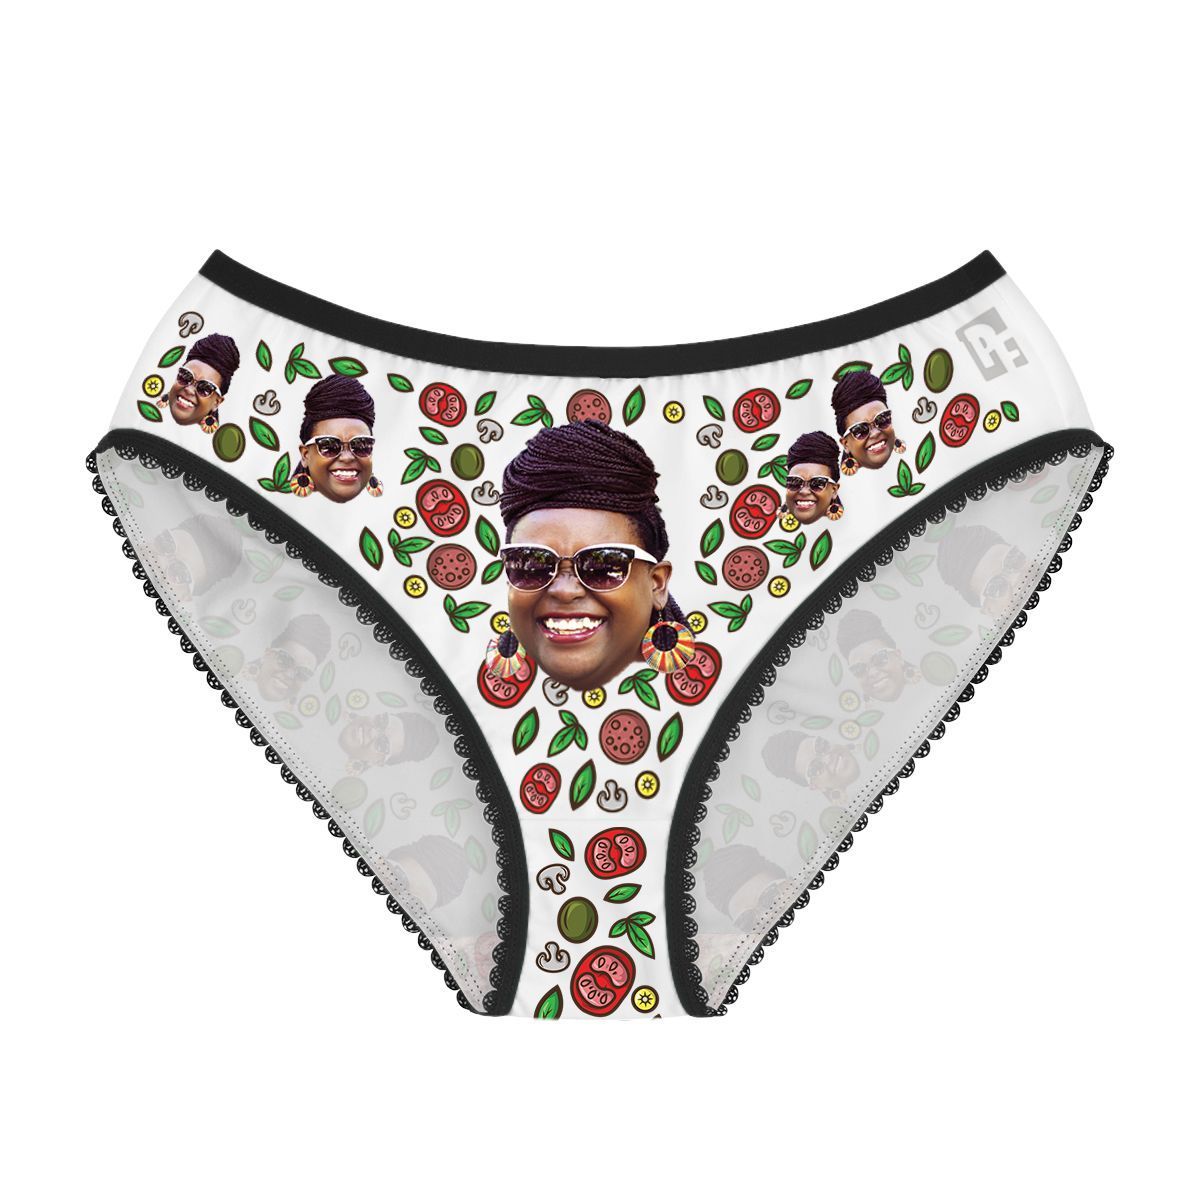 White Pizza women's underwear briefs personalized with photo printed on them